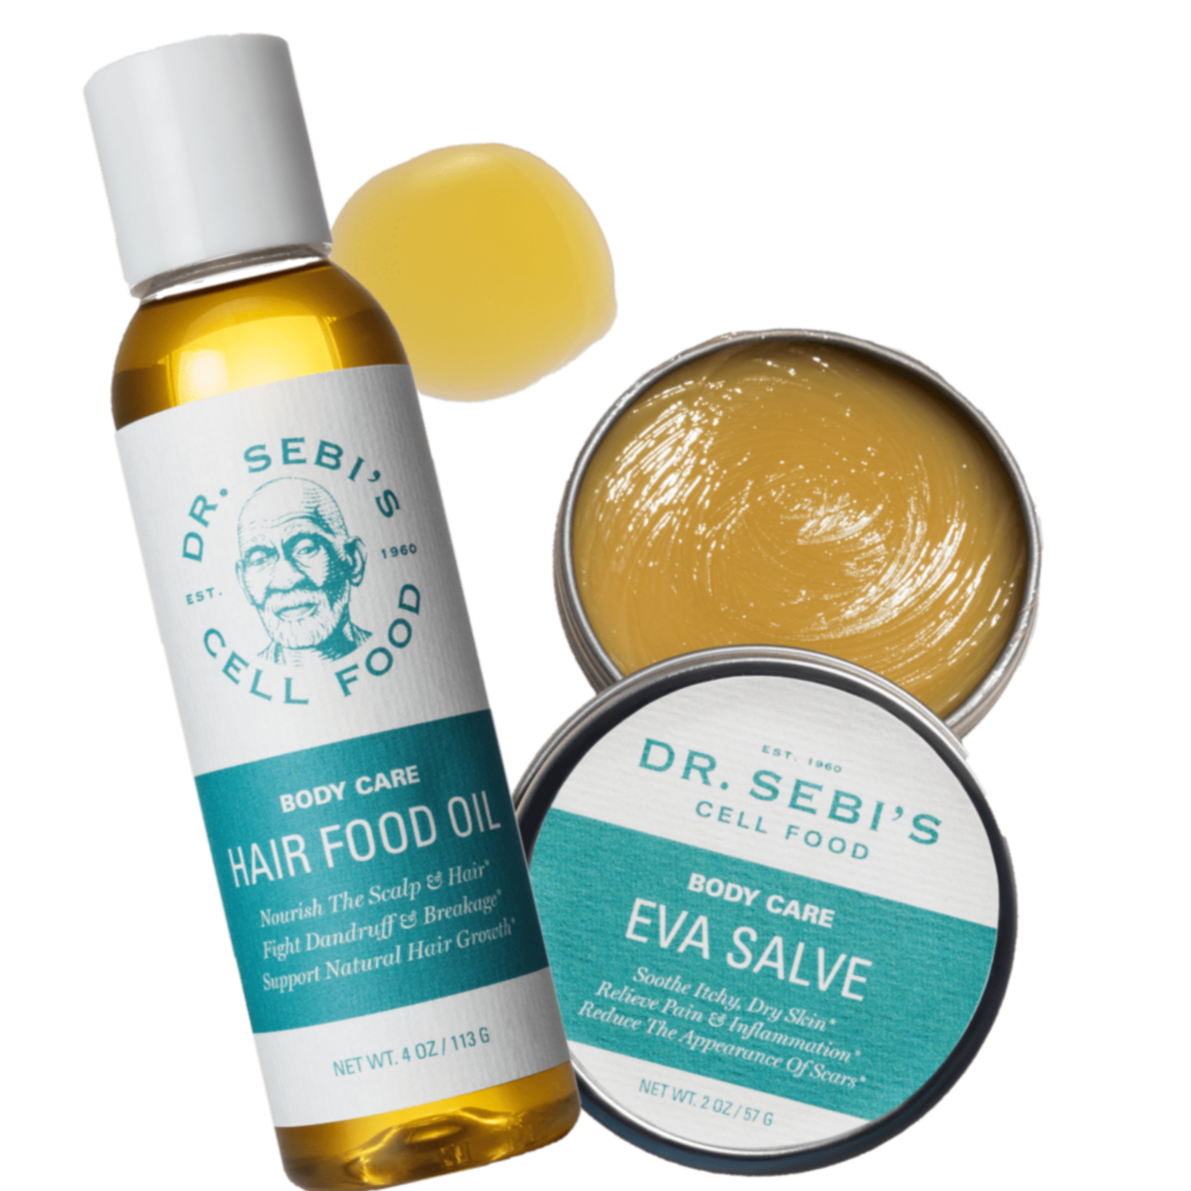 Transform Your Self-Care with Dr. Sebi's Hair & Skin Duo